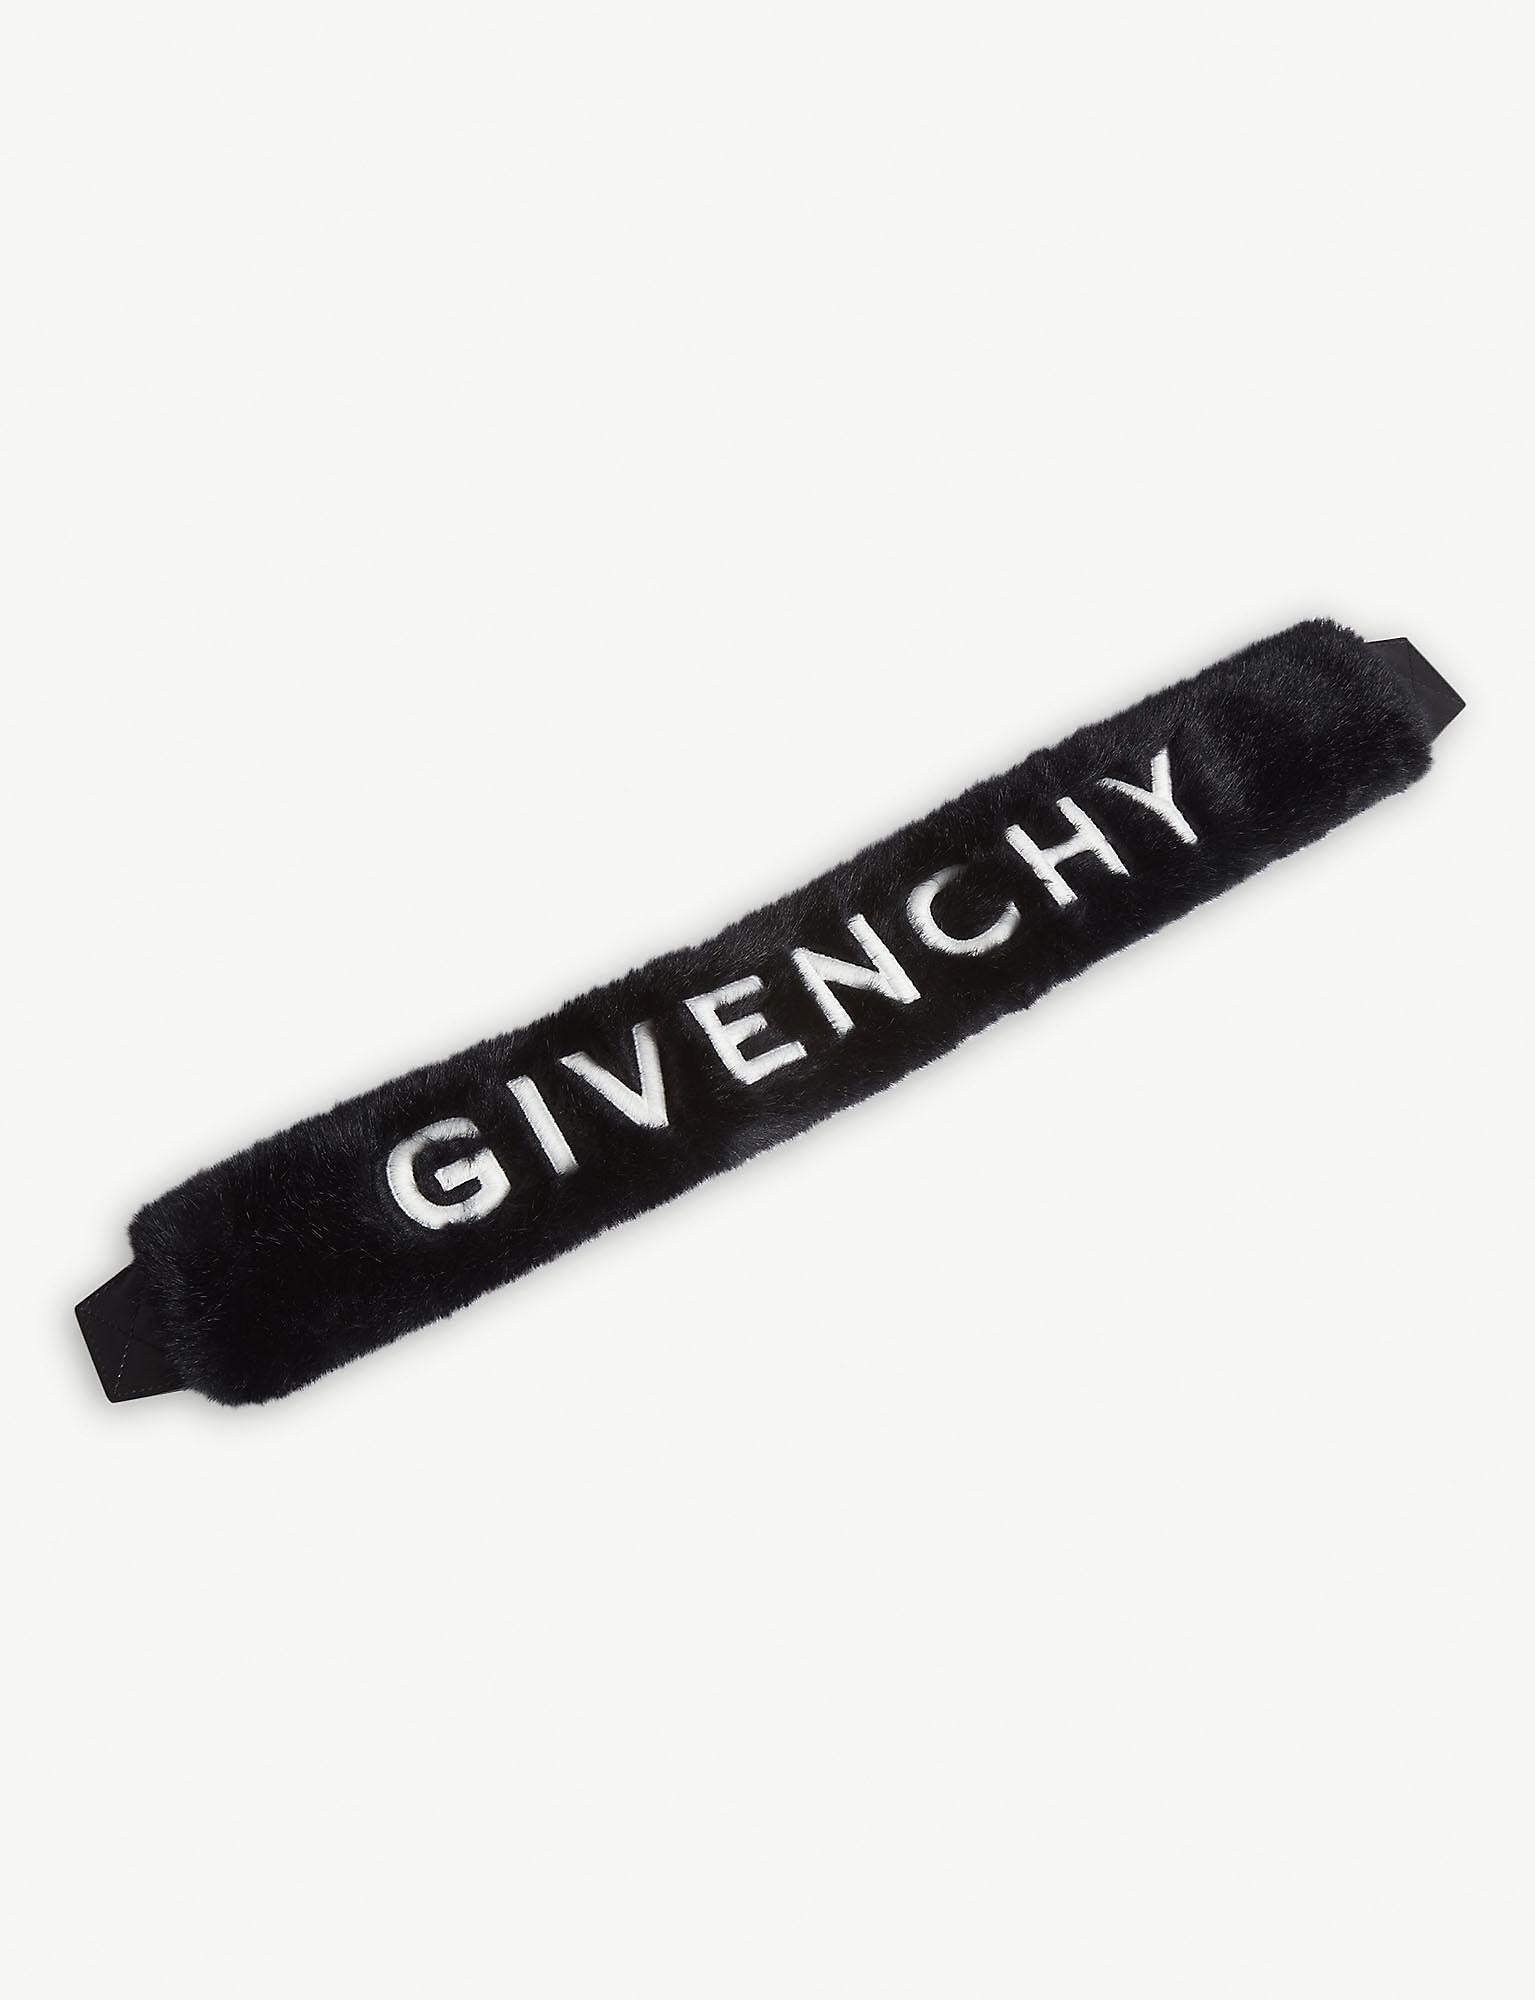 givenchy bag with fur strap